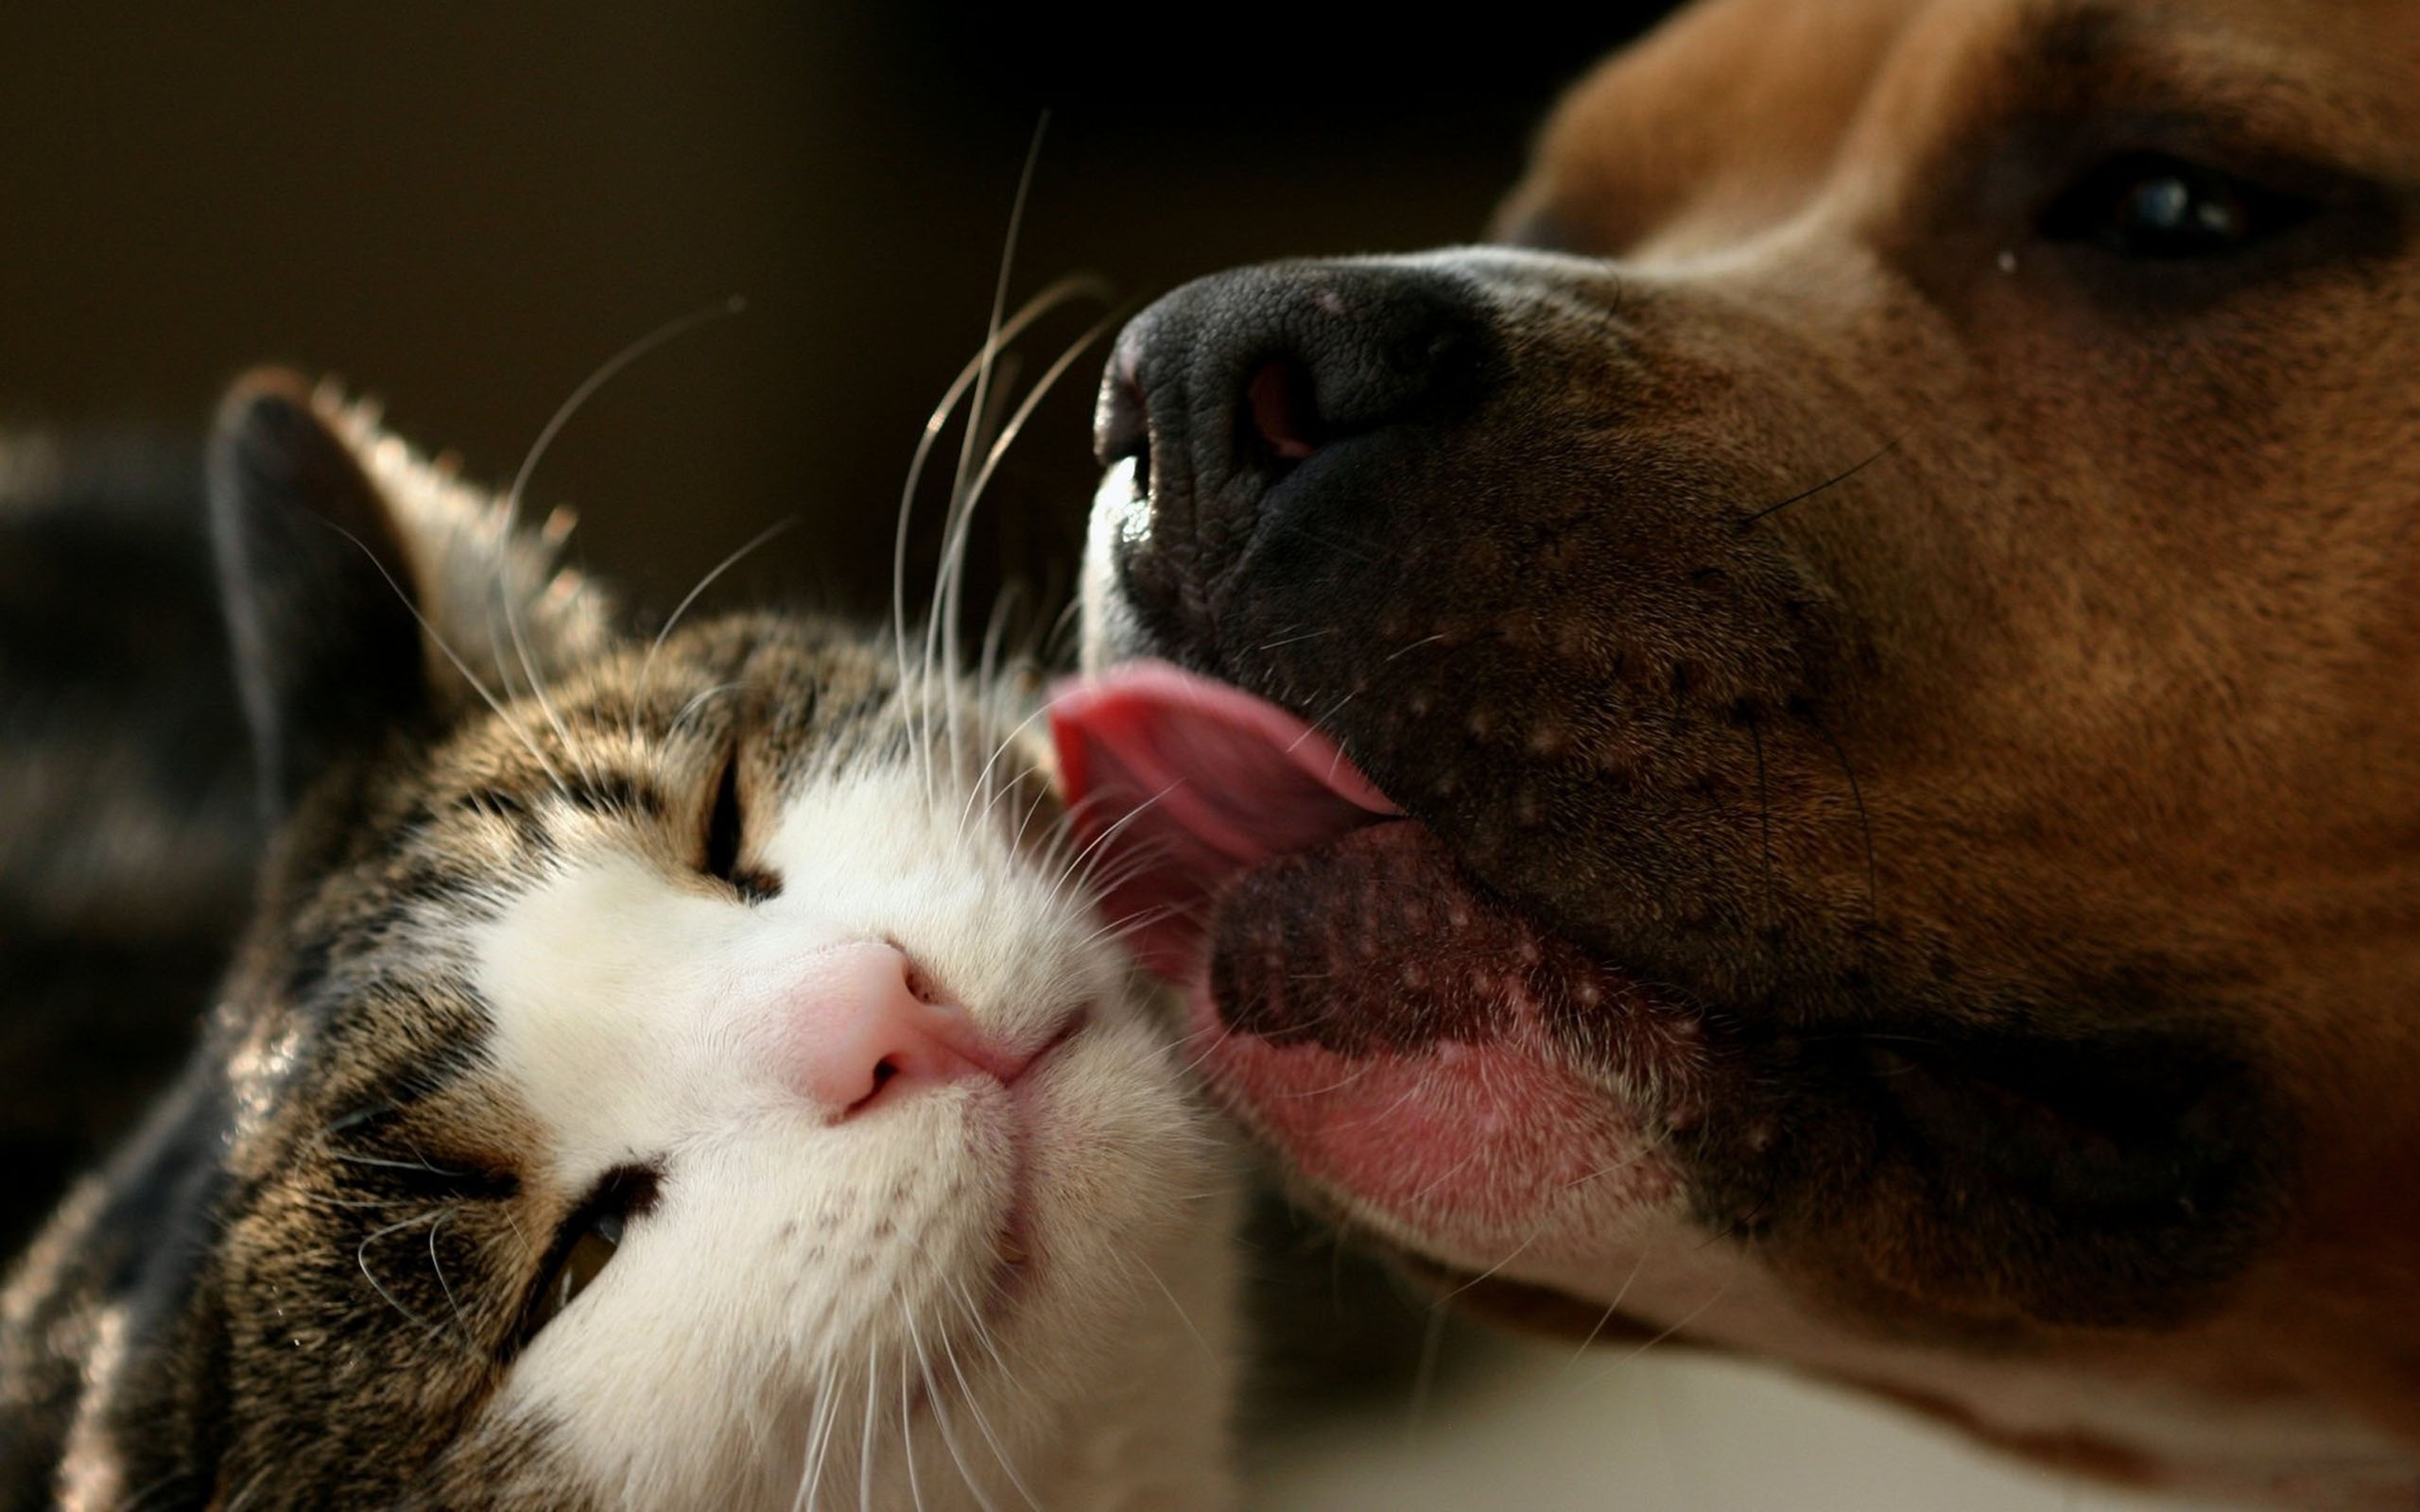  HQ Why We Love Cats And Dogs 2560x1600 Wallpaper   HQ Wallpapers 2560x1600